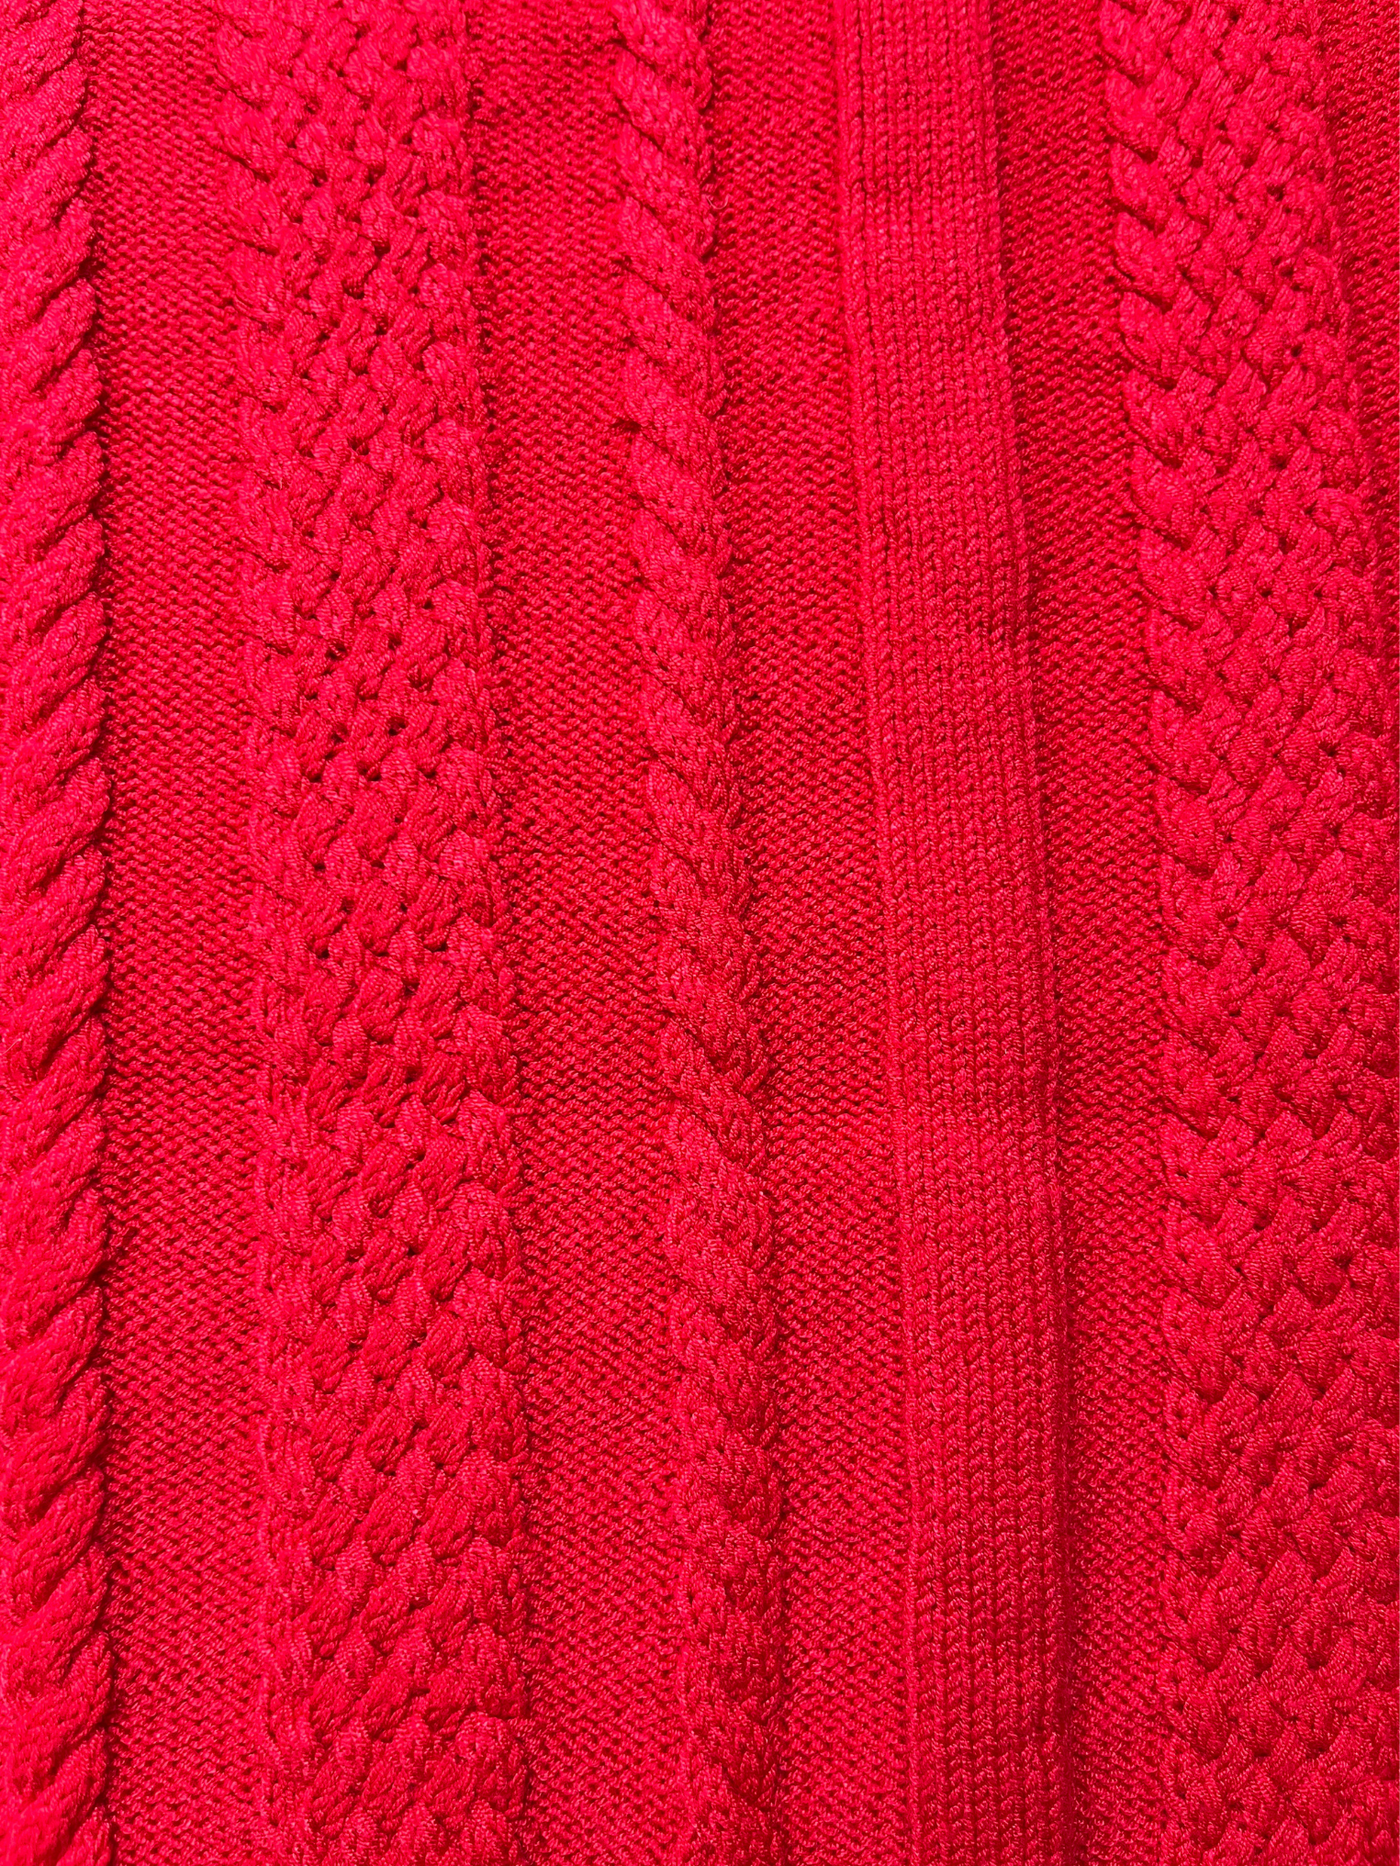 HIBISCUS-RED NOSLEEVE KNIT